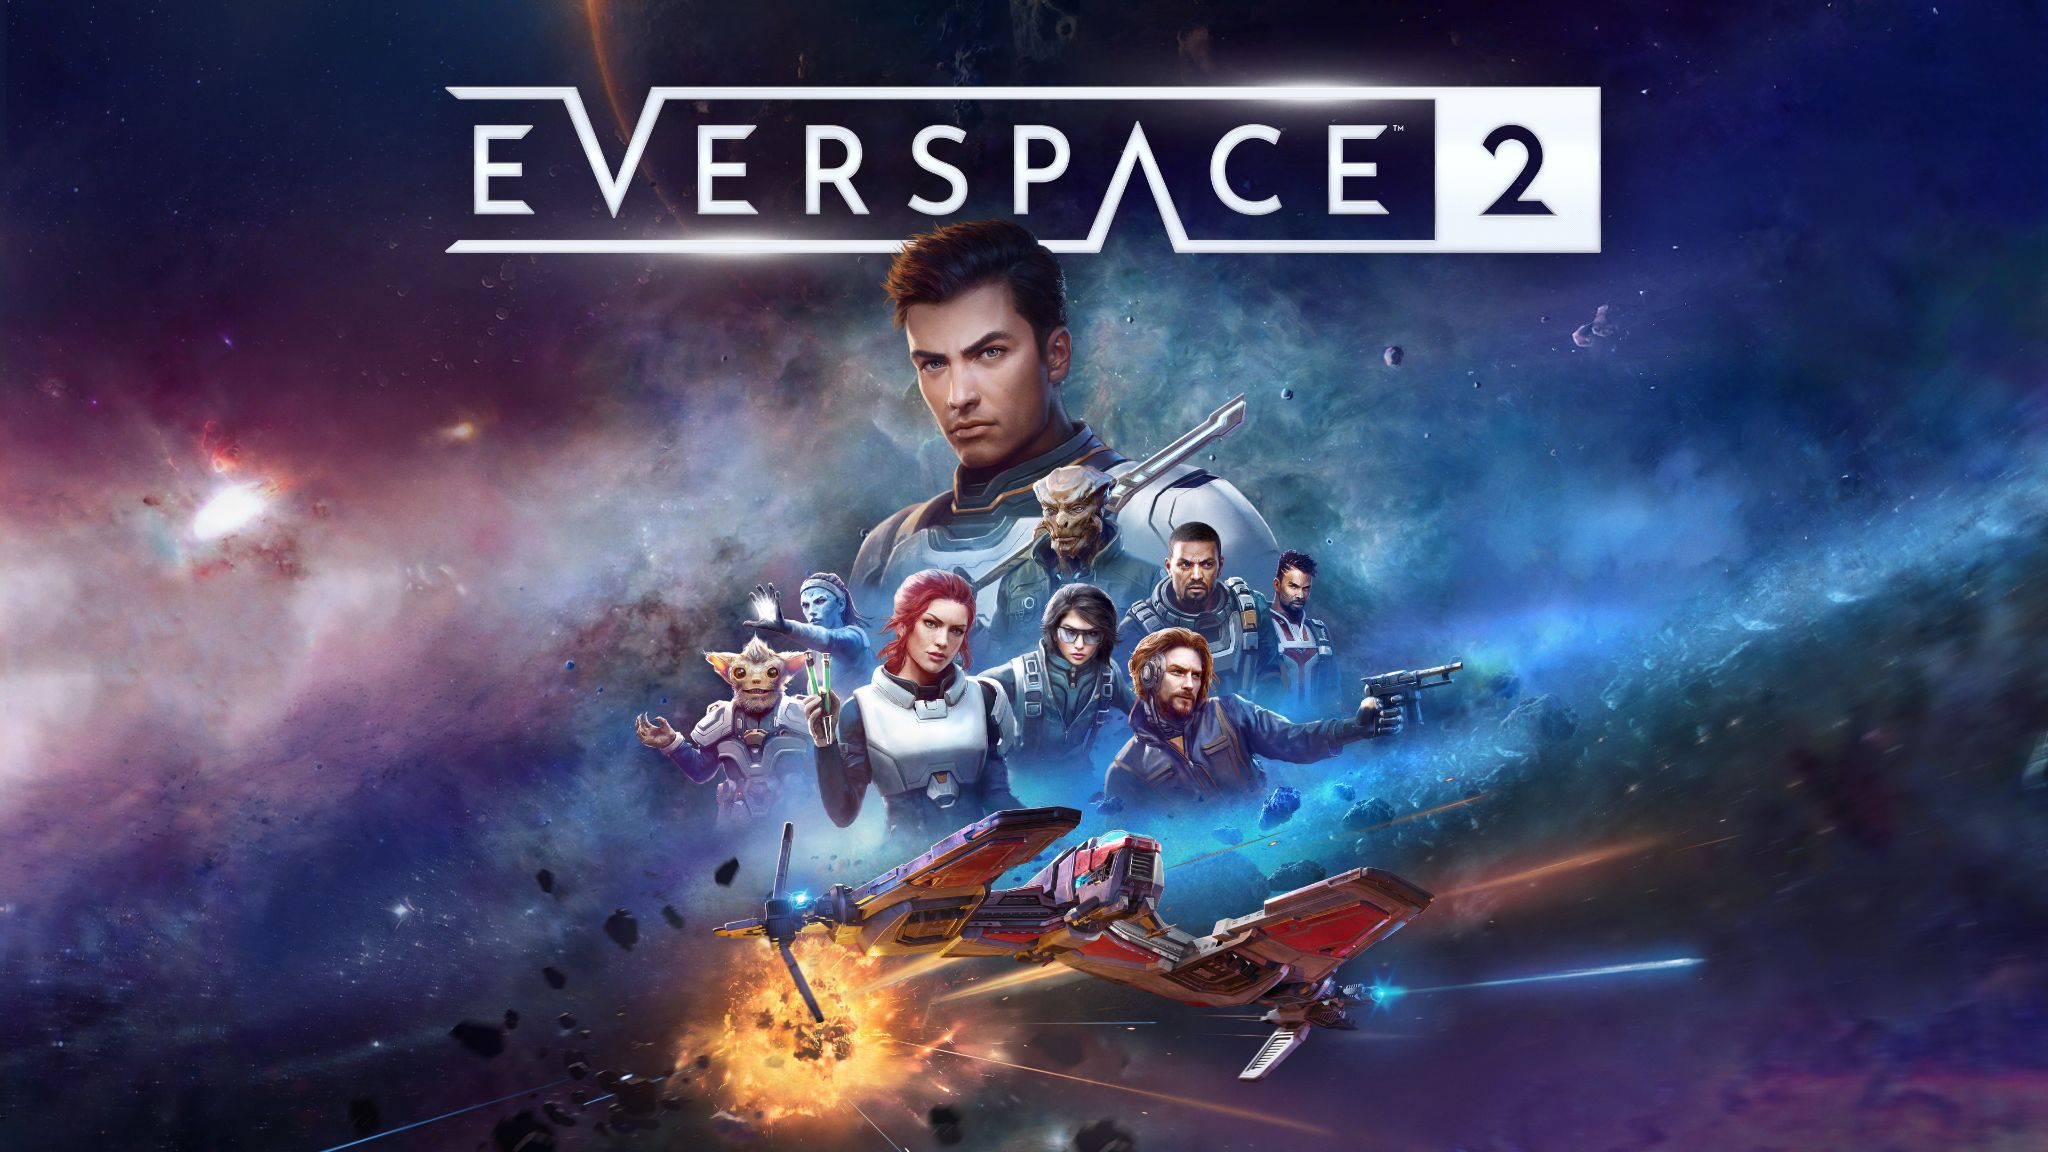 #
      EVERSPACE 2 launches April 6 for PC, this summer for PS5 and Xbox Series